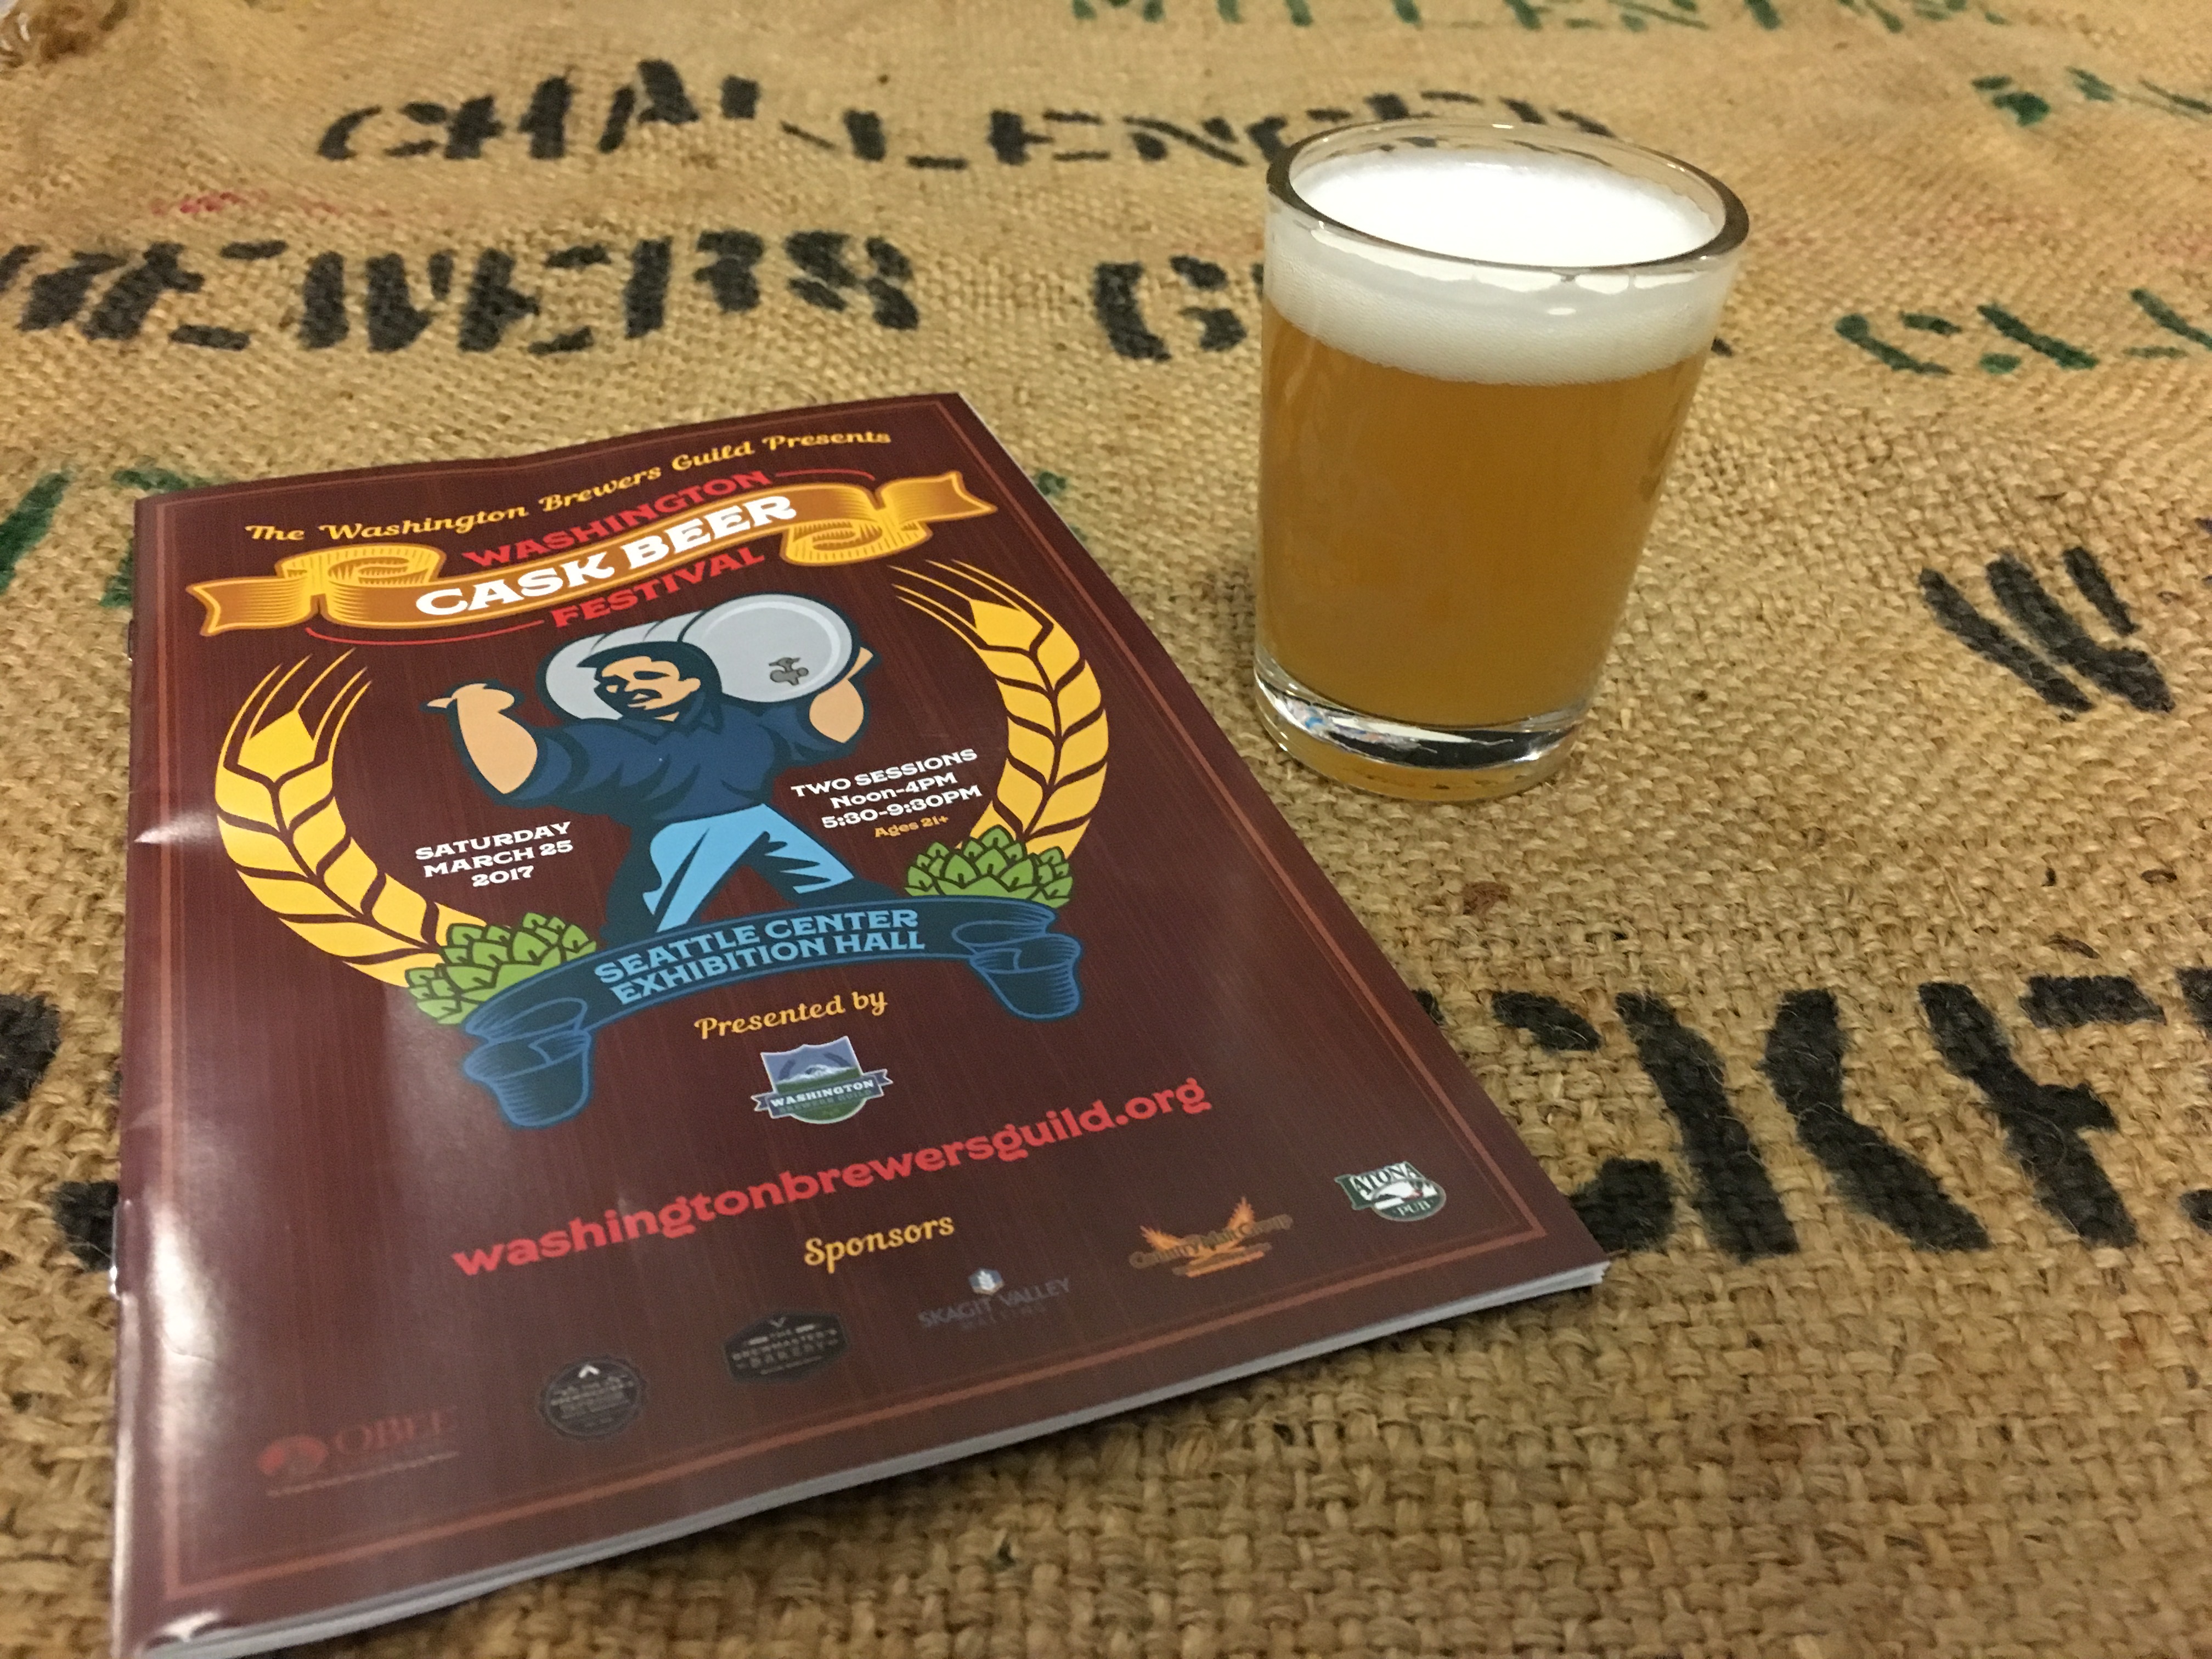 2017 Washington Cask Beer Festival was another favorite of ours. Its always worth making the trip to Seattle for this festival.